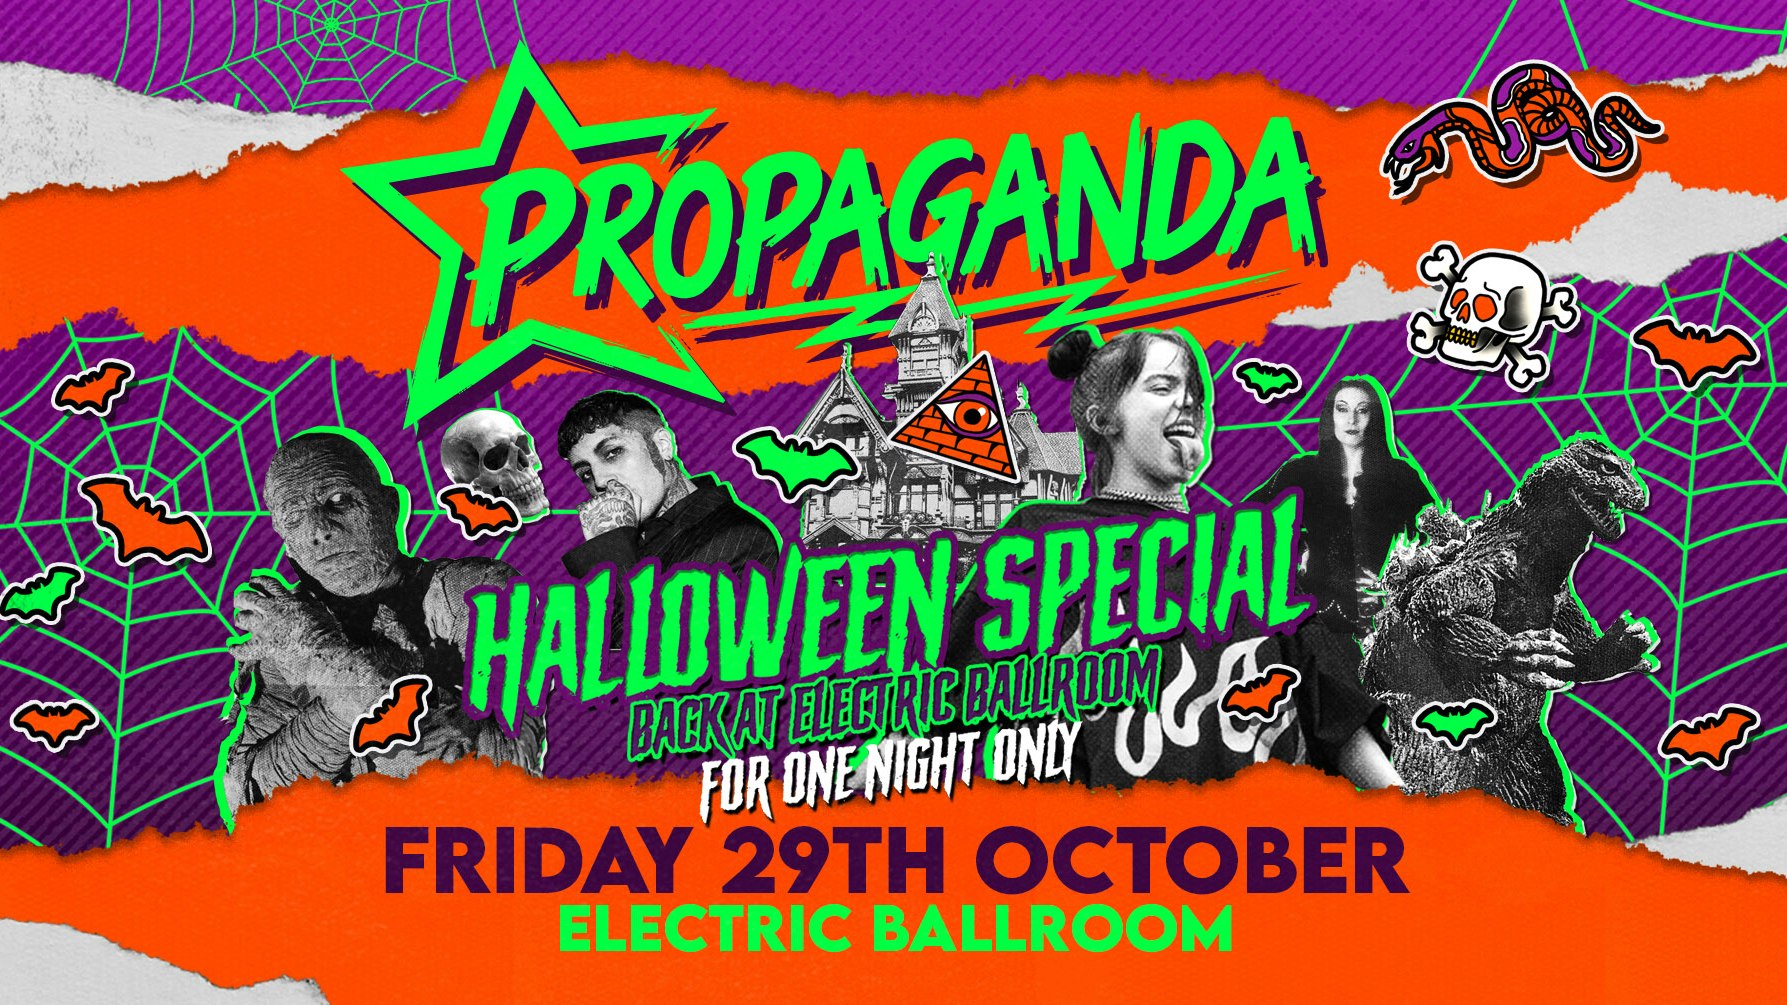 Propaganda London Halloween Special! Back at ELECTRIC BALLROOM for one night only! Friday 29th October